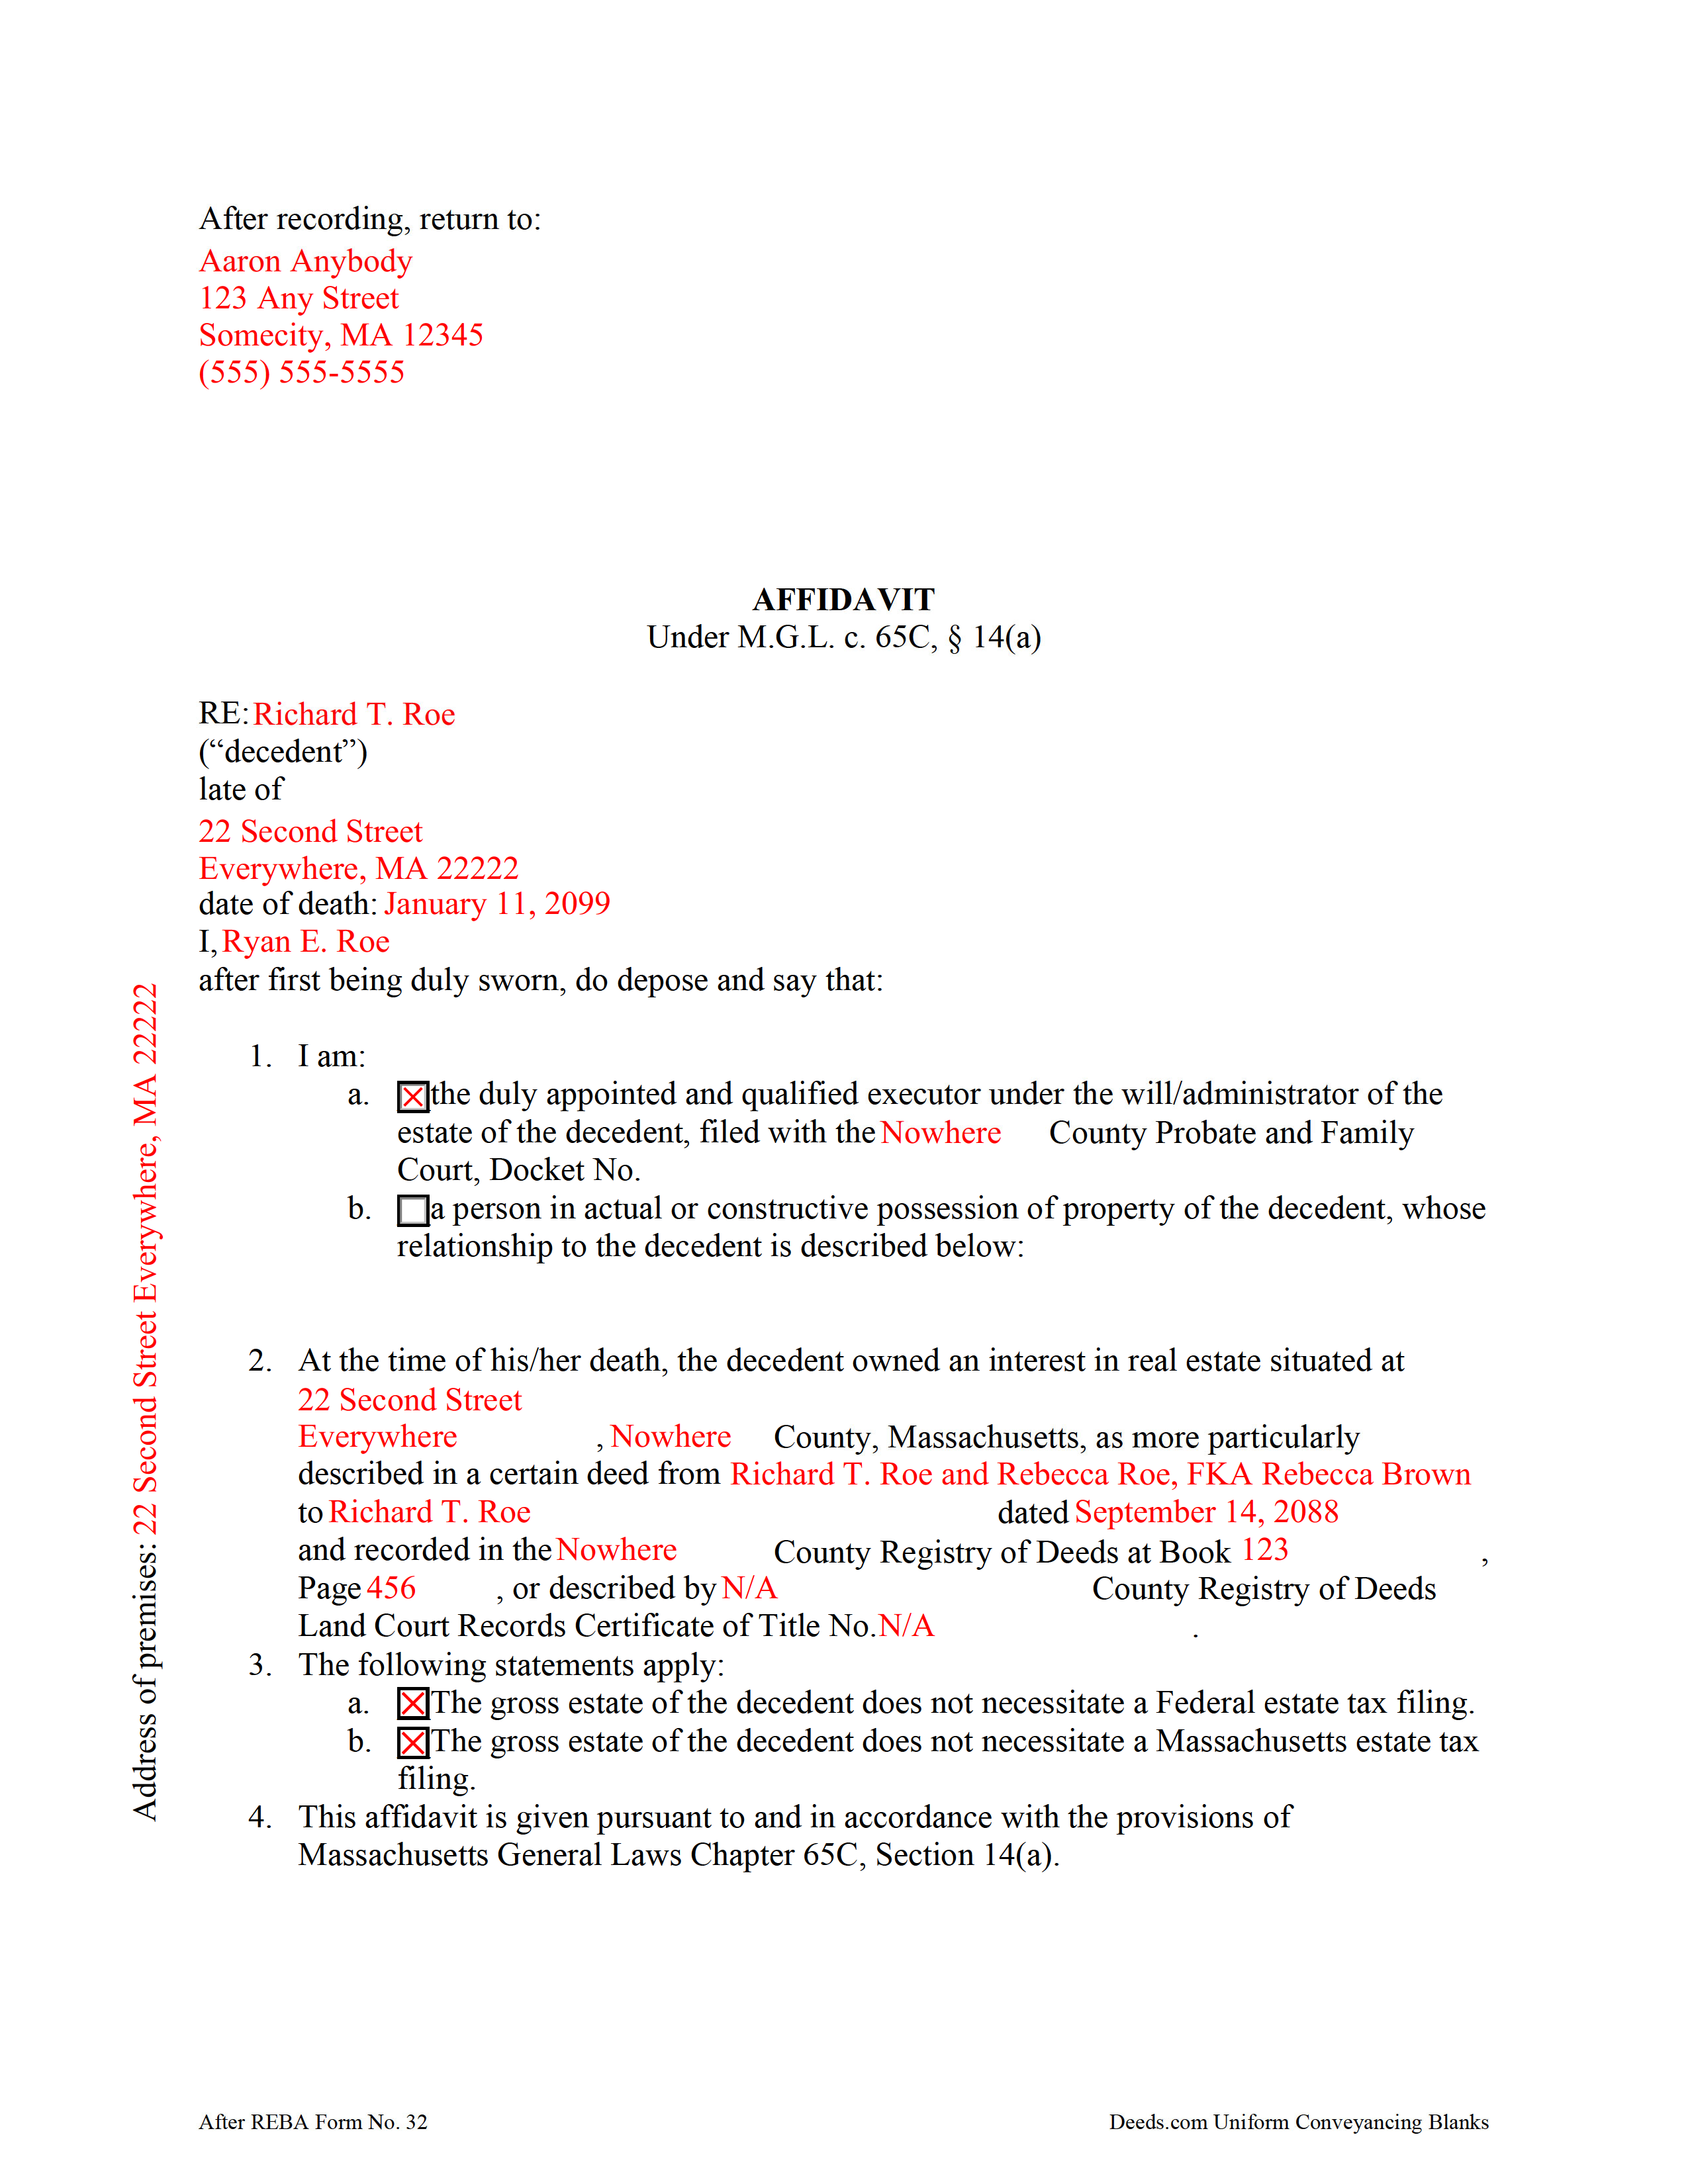 Completed Example of the Estate Tax Affidavit Document